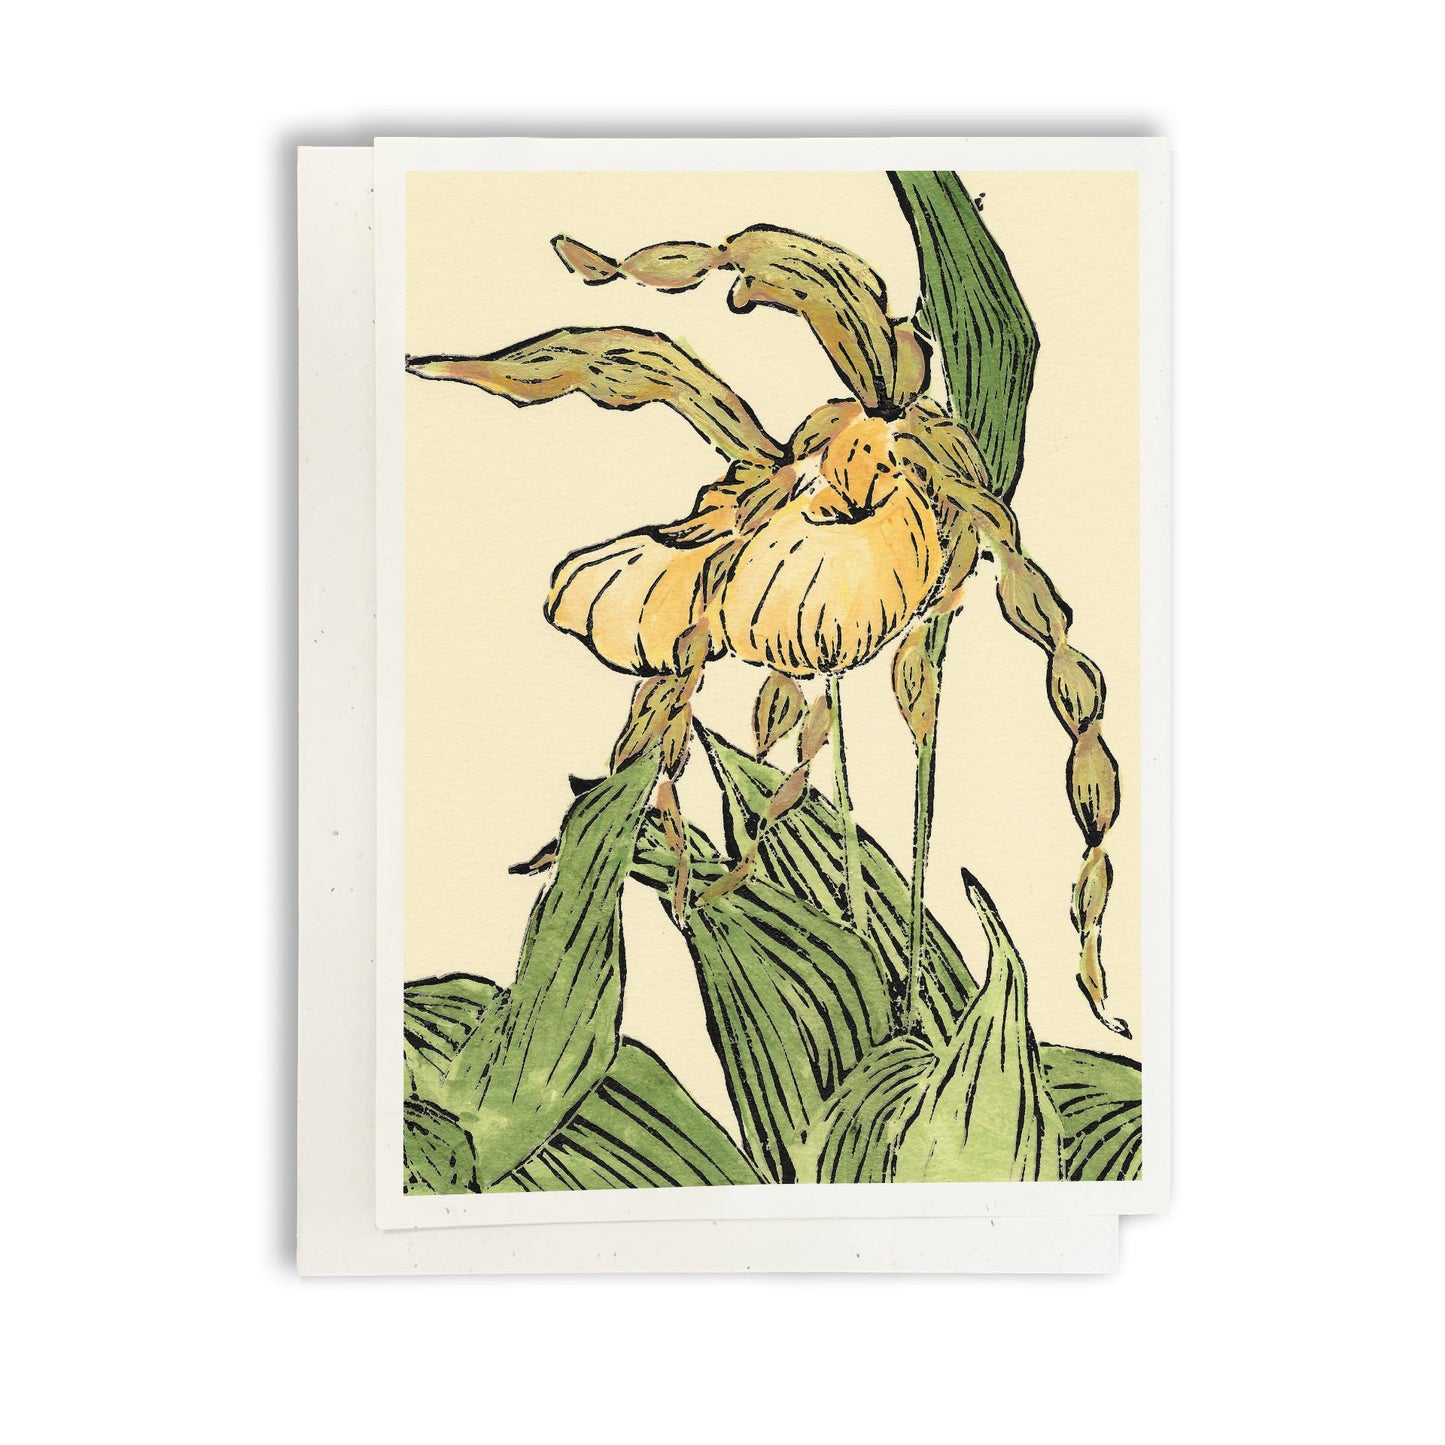 A casually elegant card featuring a digital reproductions of Natalia Wohletz's block print design titled Lady's Slipper Pair.